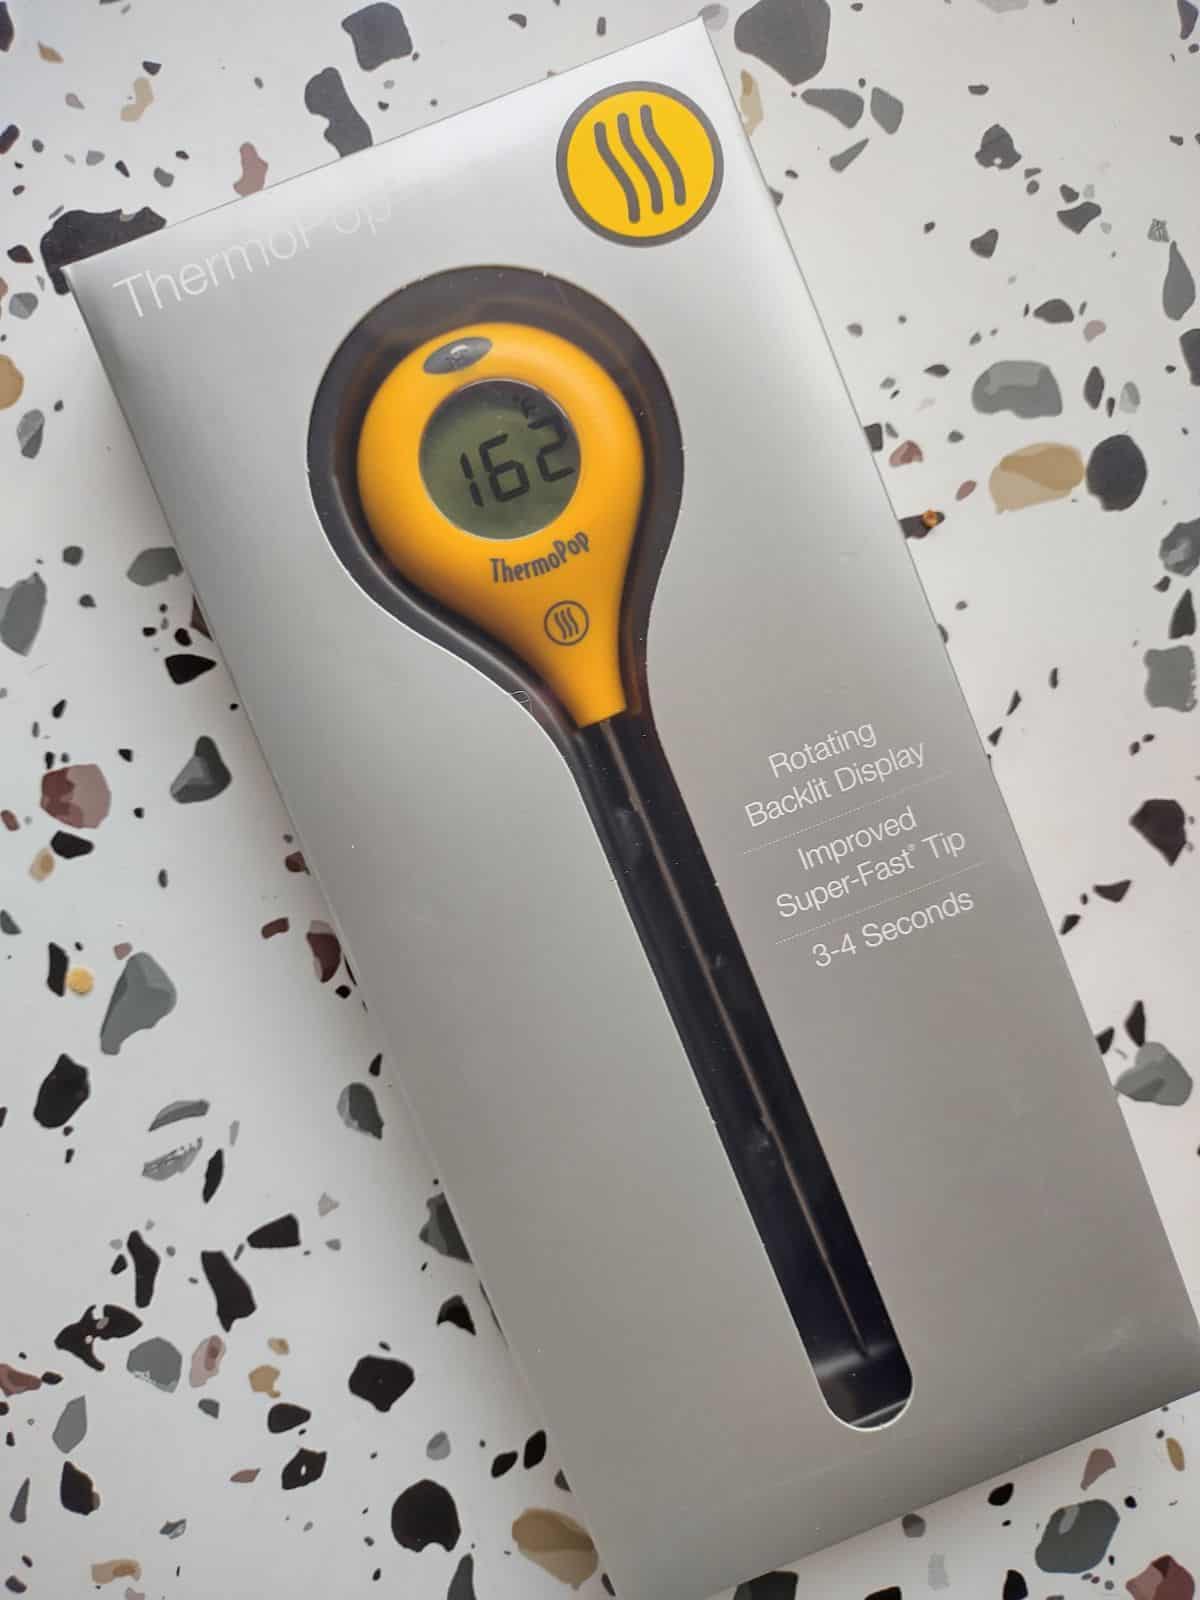 A Thermoworks ThermoPop digital instant read thermometer in a gray box.